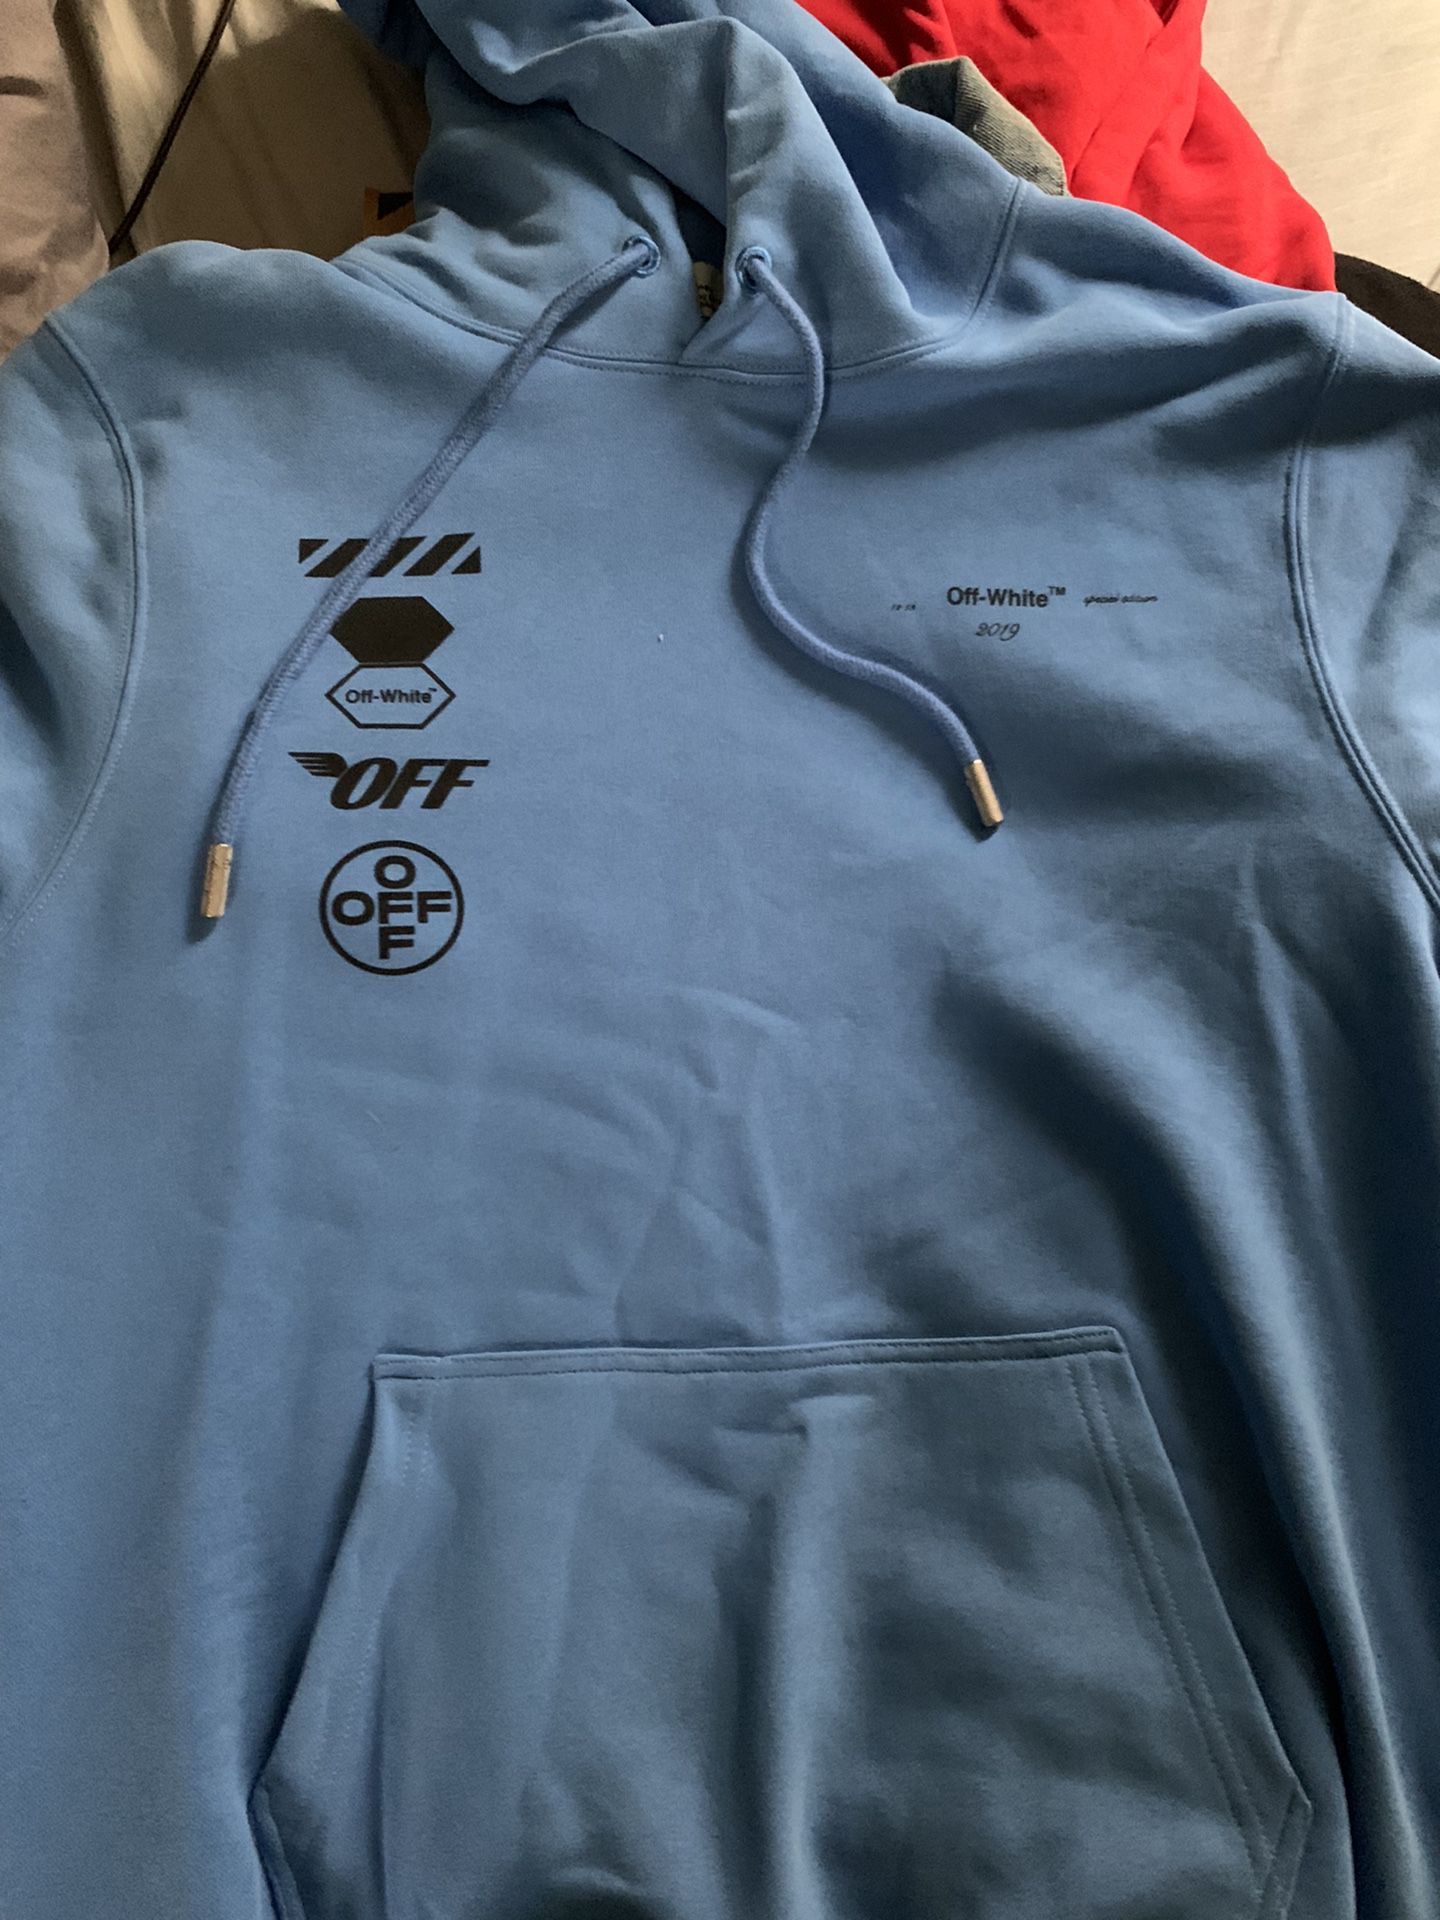 Off-white hoodie 2019